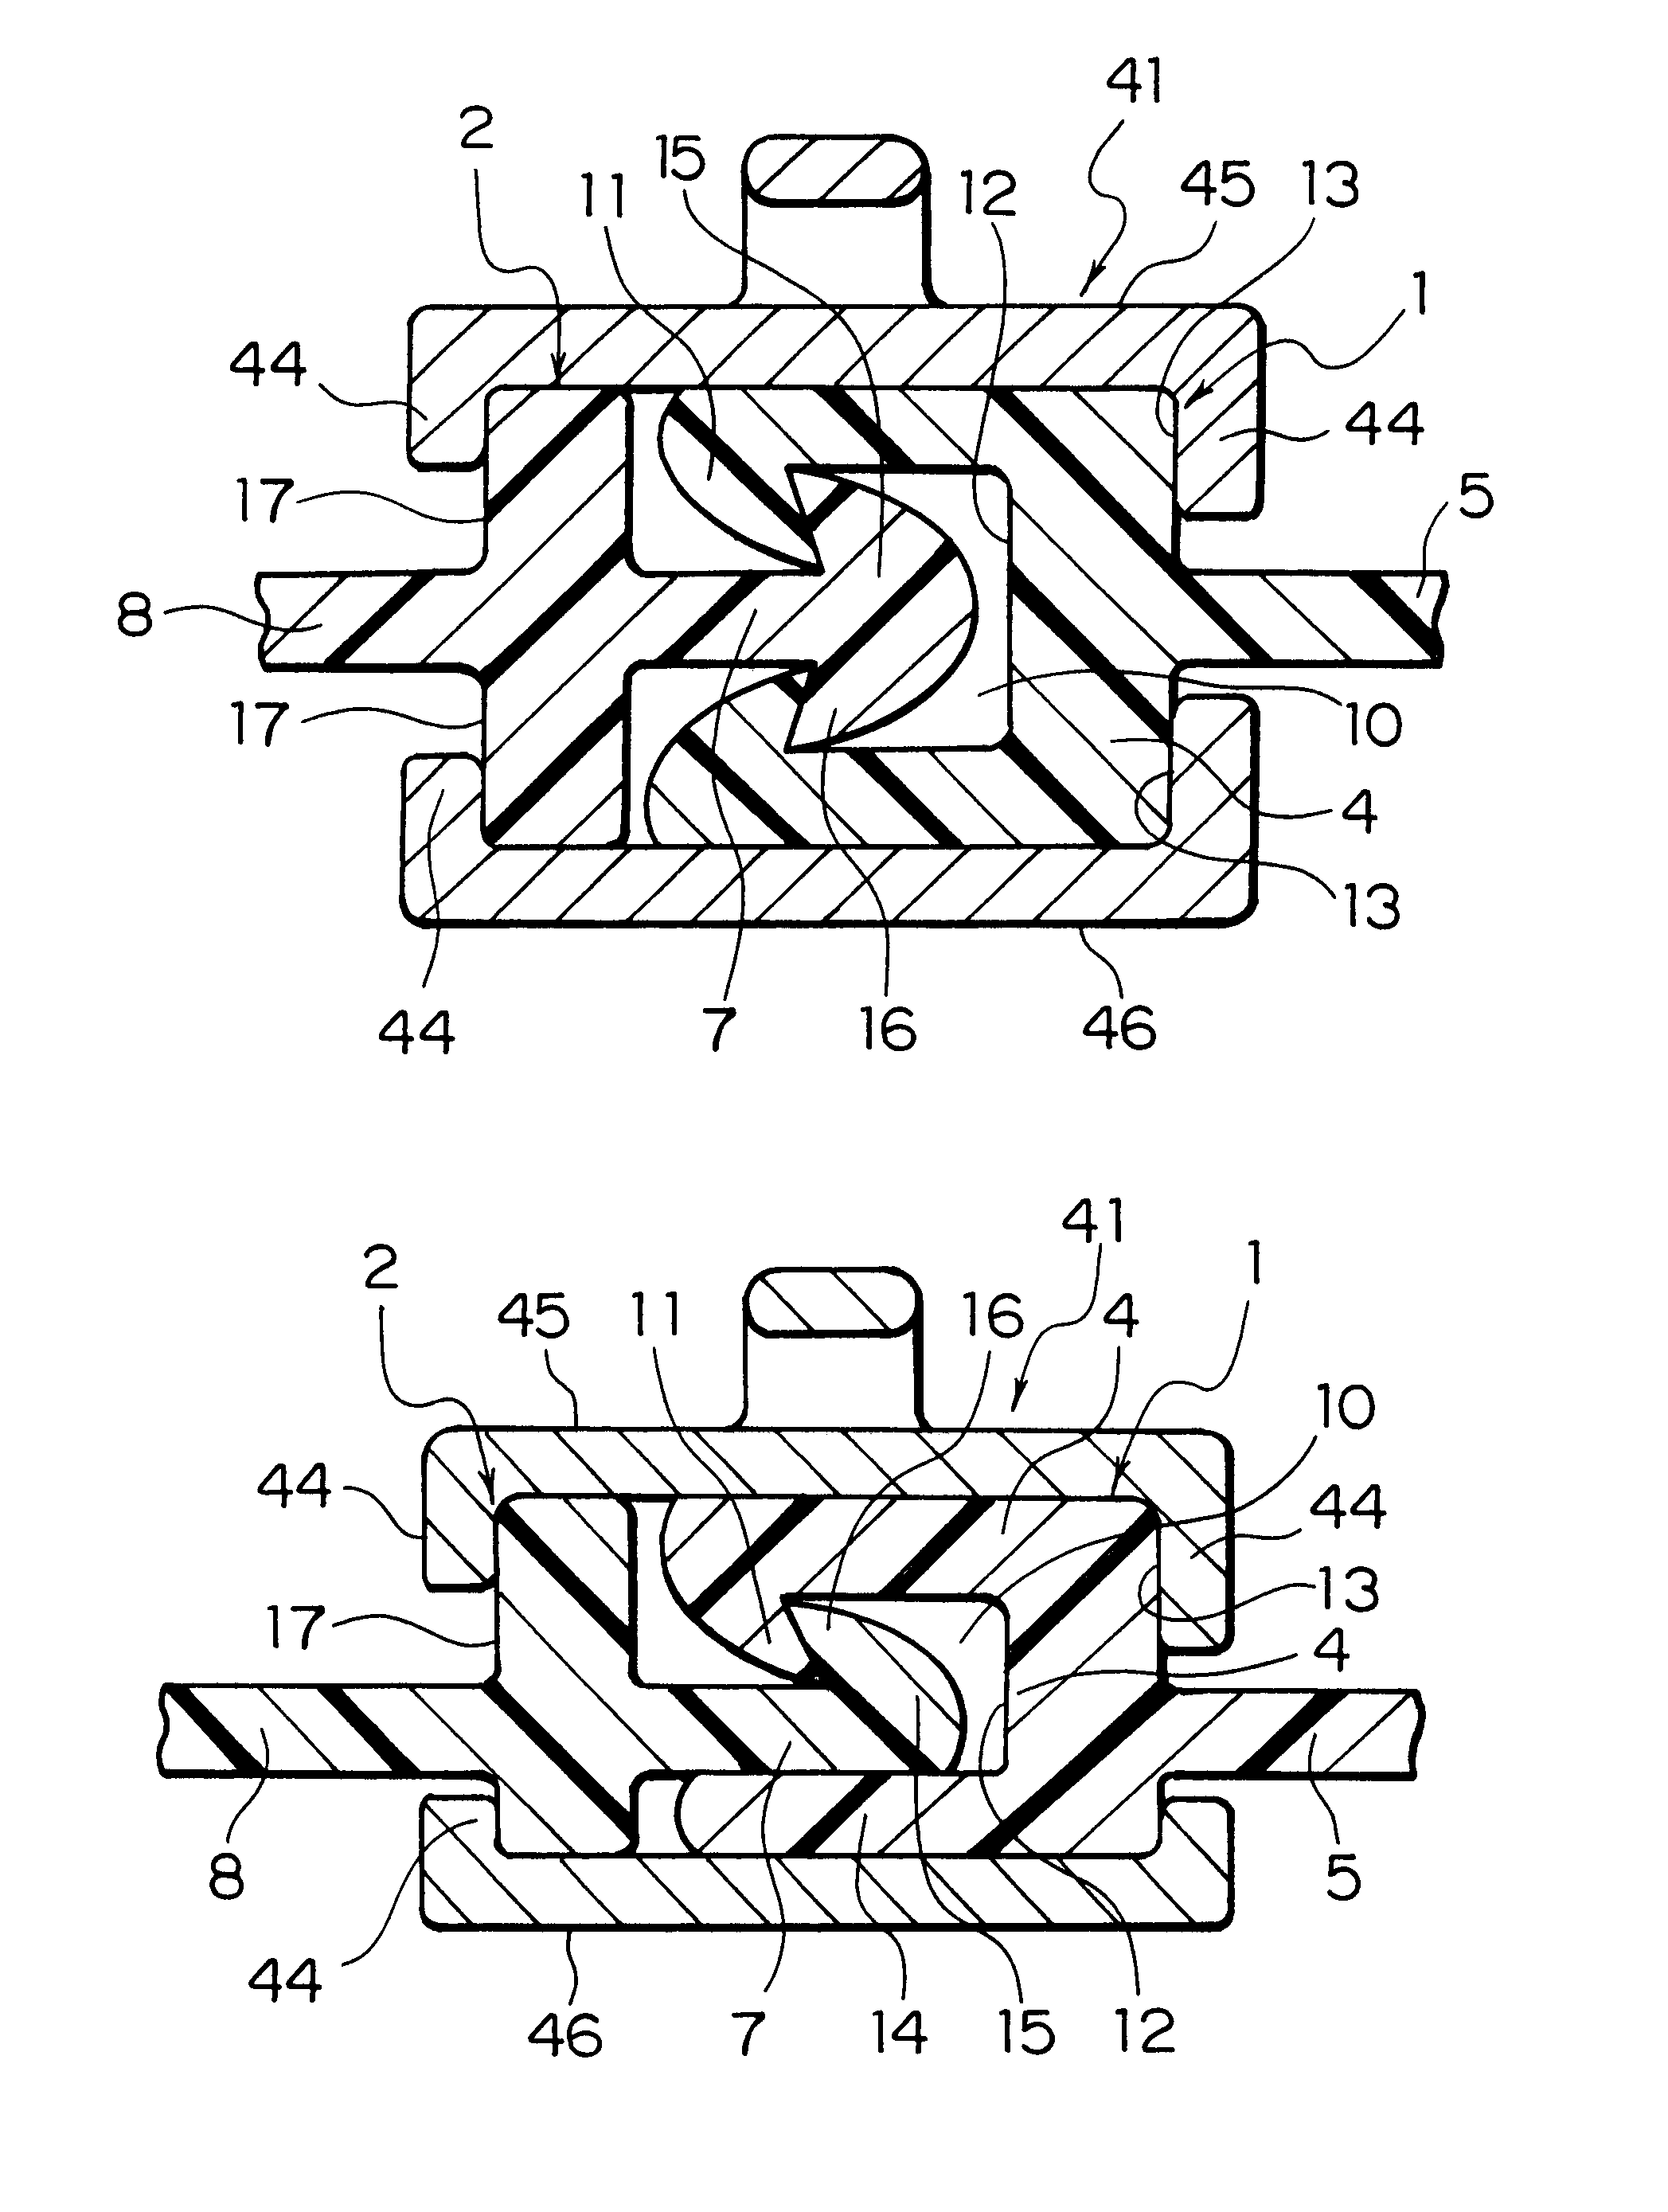 Meshing slide fastener with an engaging device